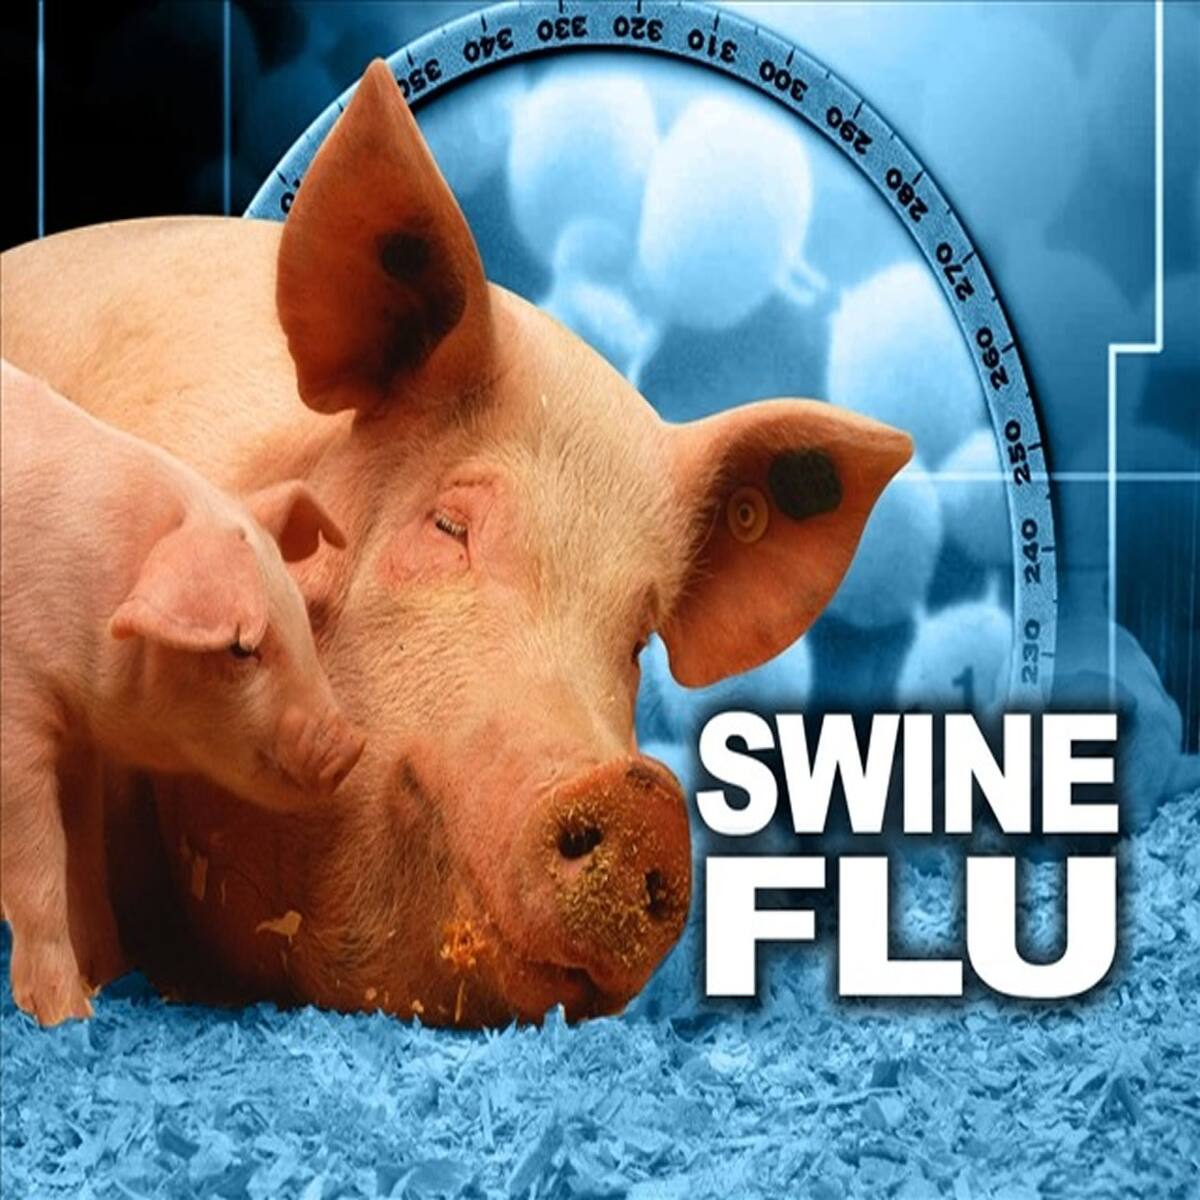 Runny Nose And 5 Other Warning Symptoms of Swine Flu